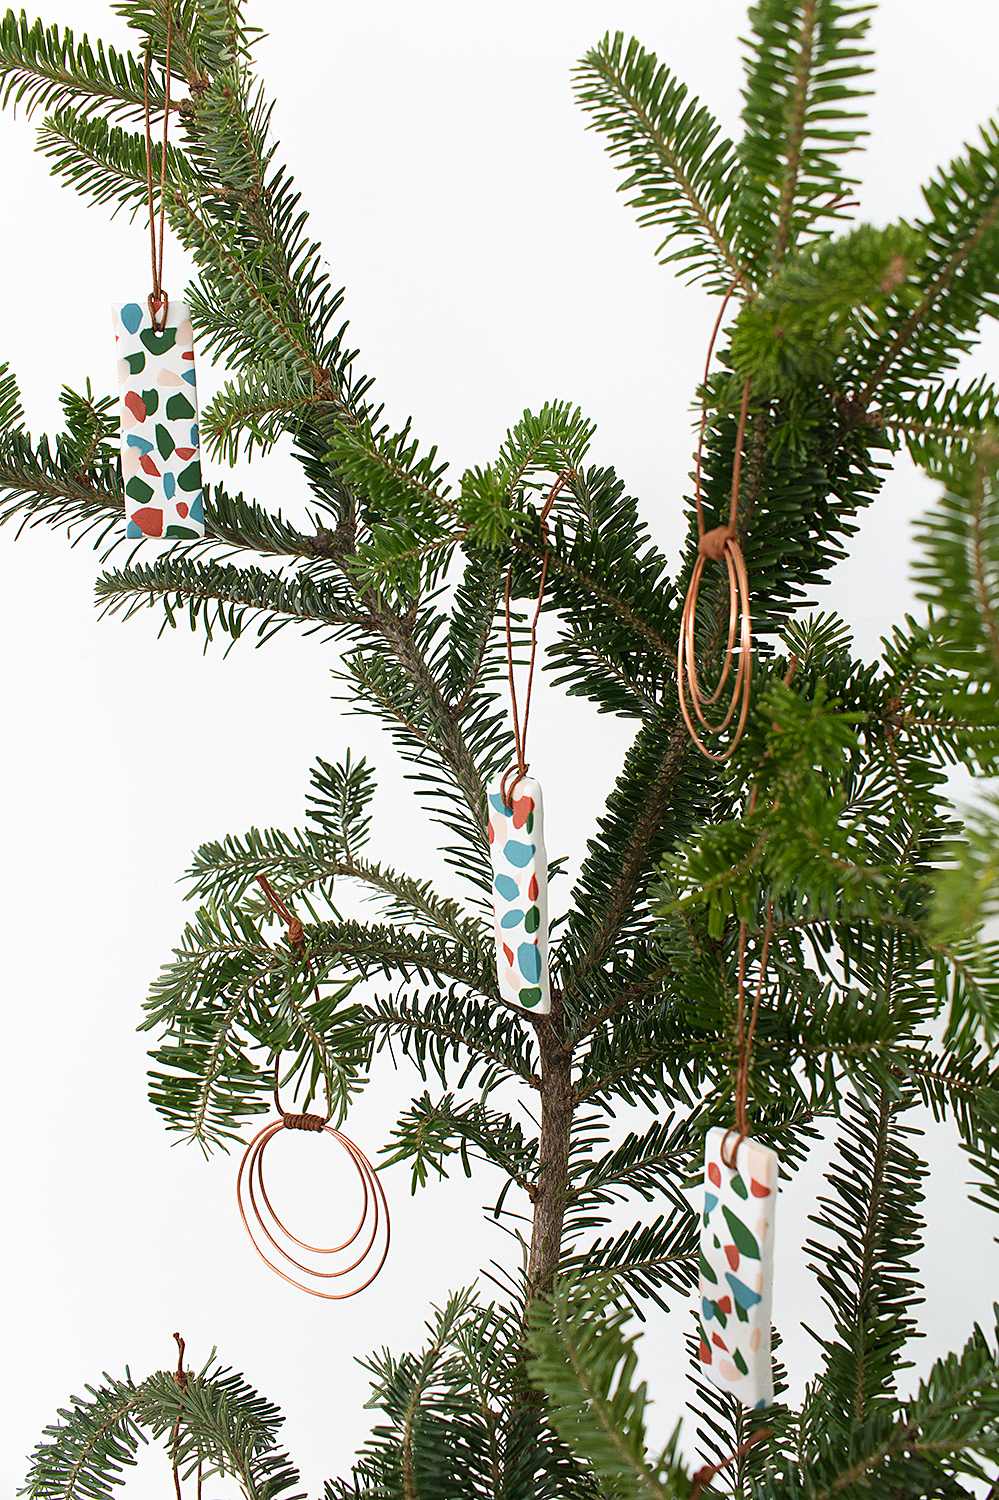 How to Make DIY Terrazzo Tile Ornaments